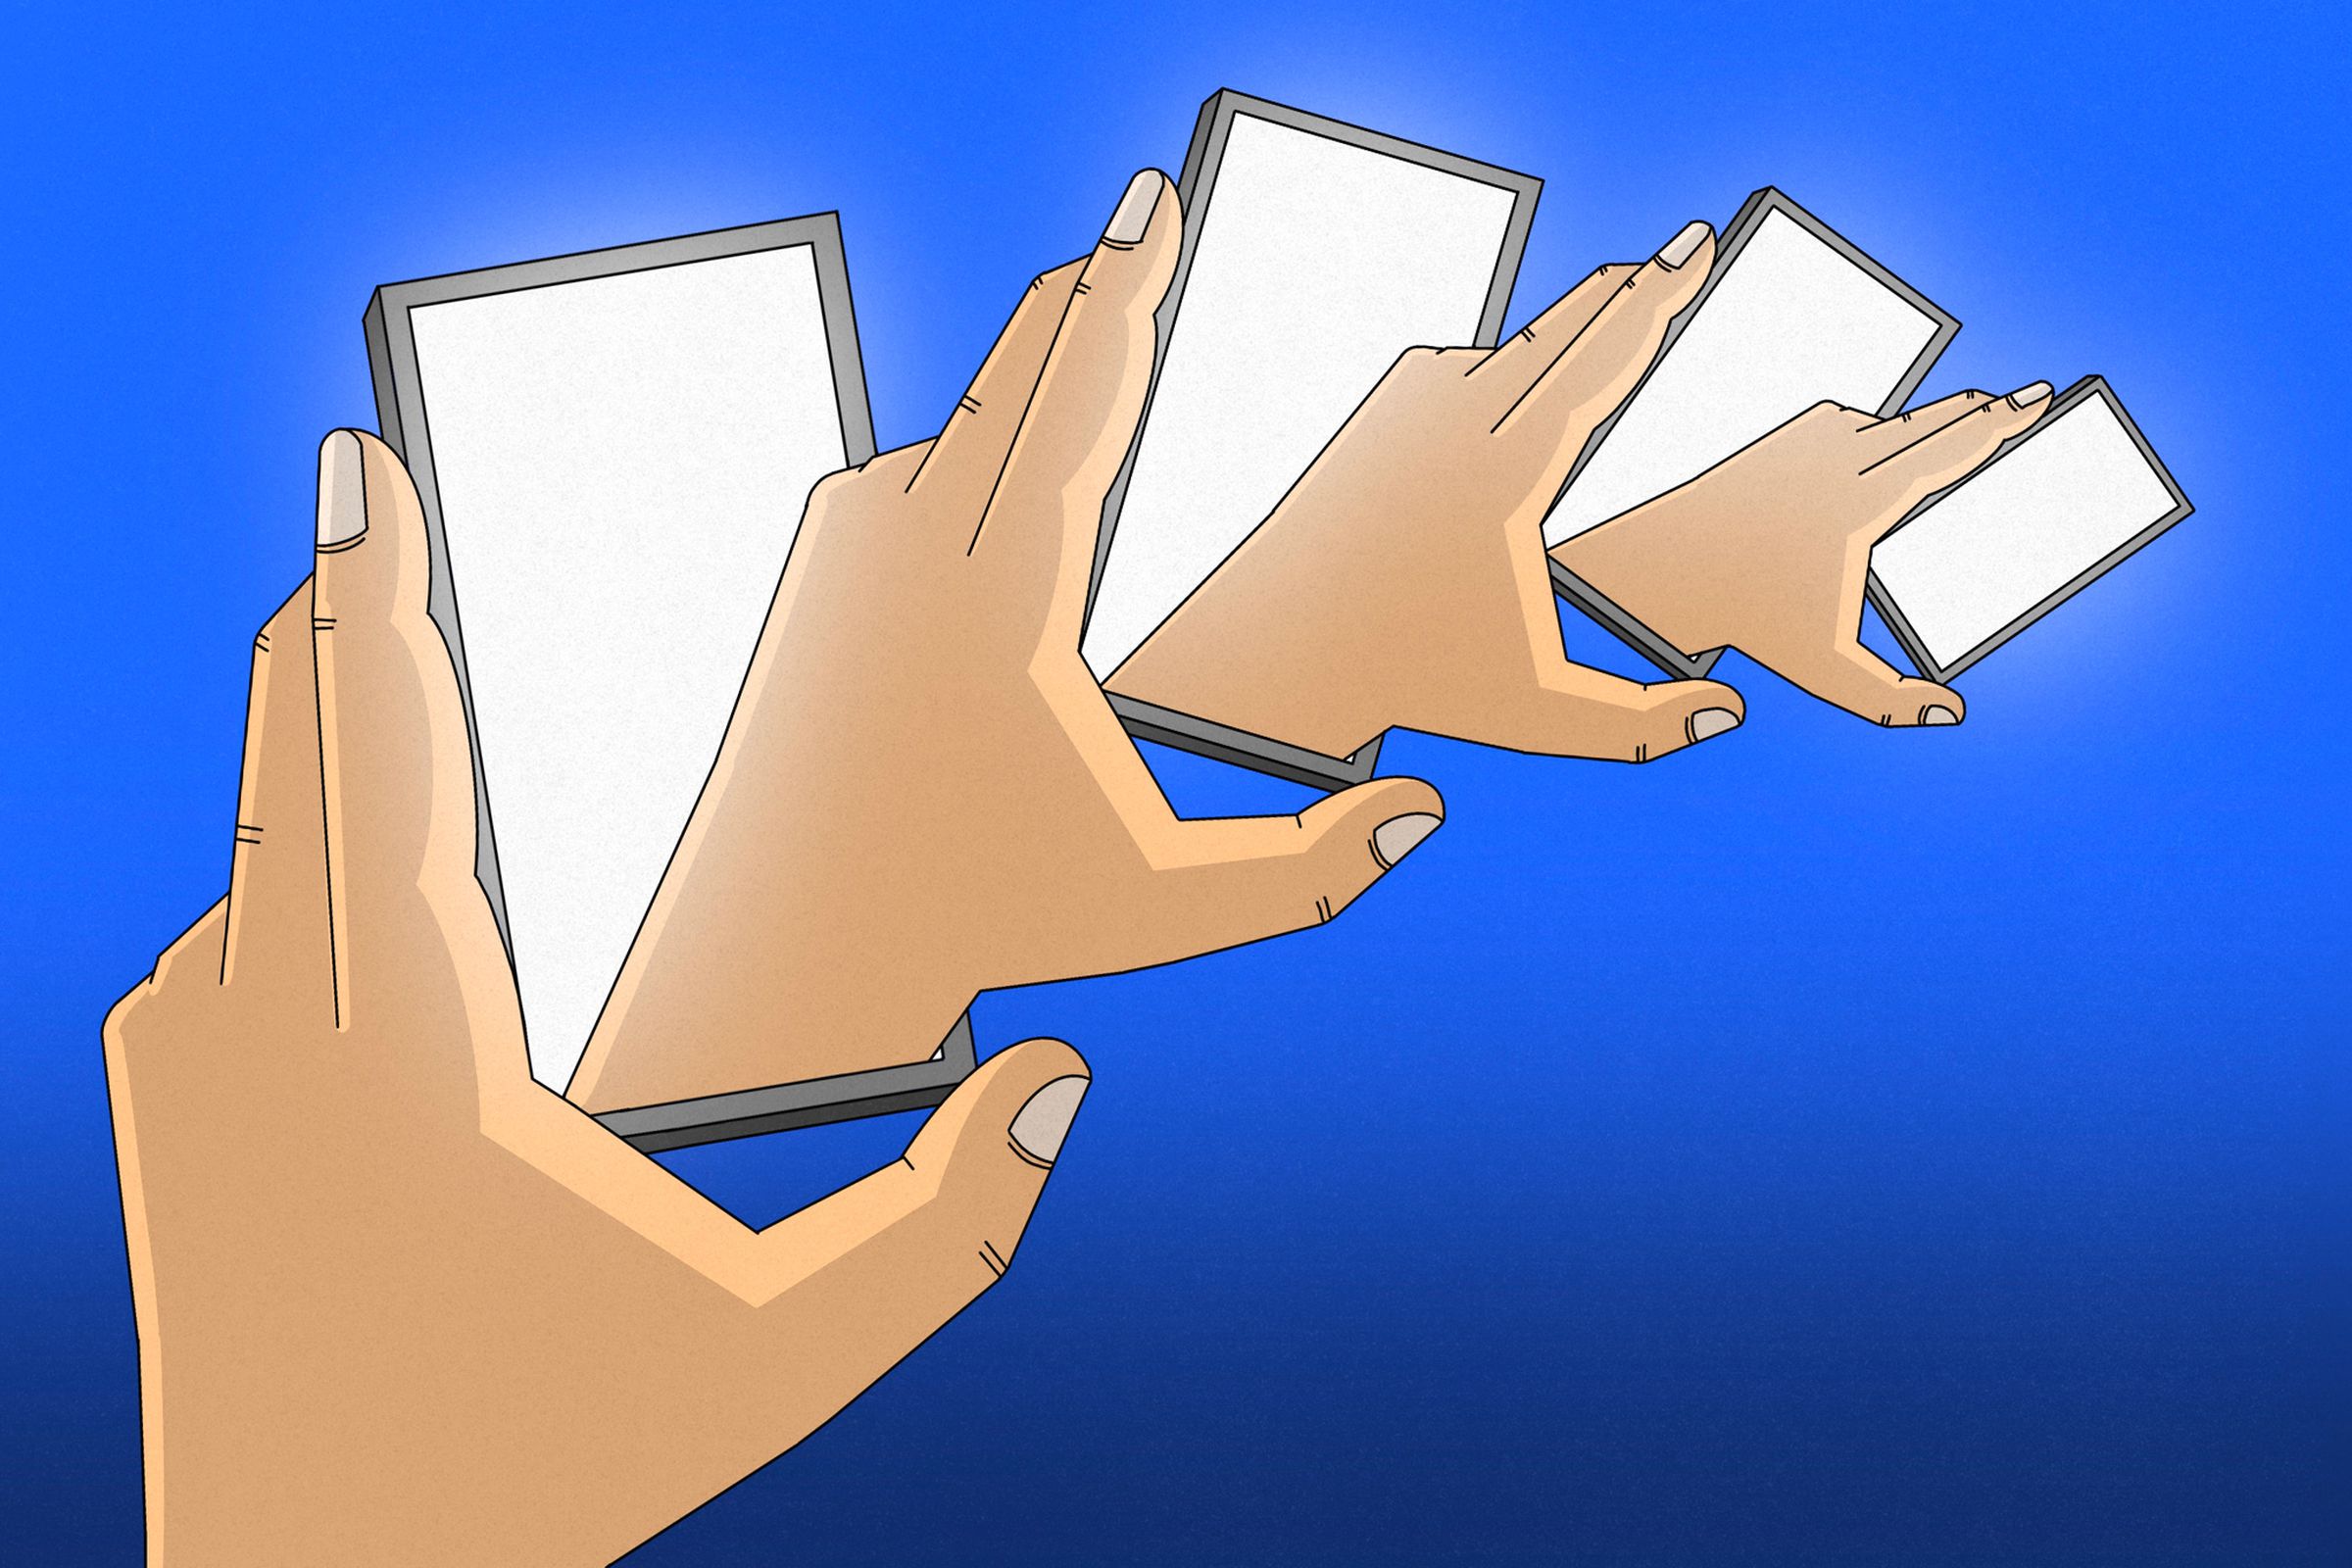 Illustration of a series of hands holding phones.